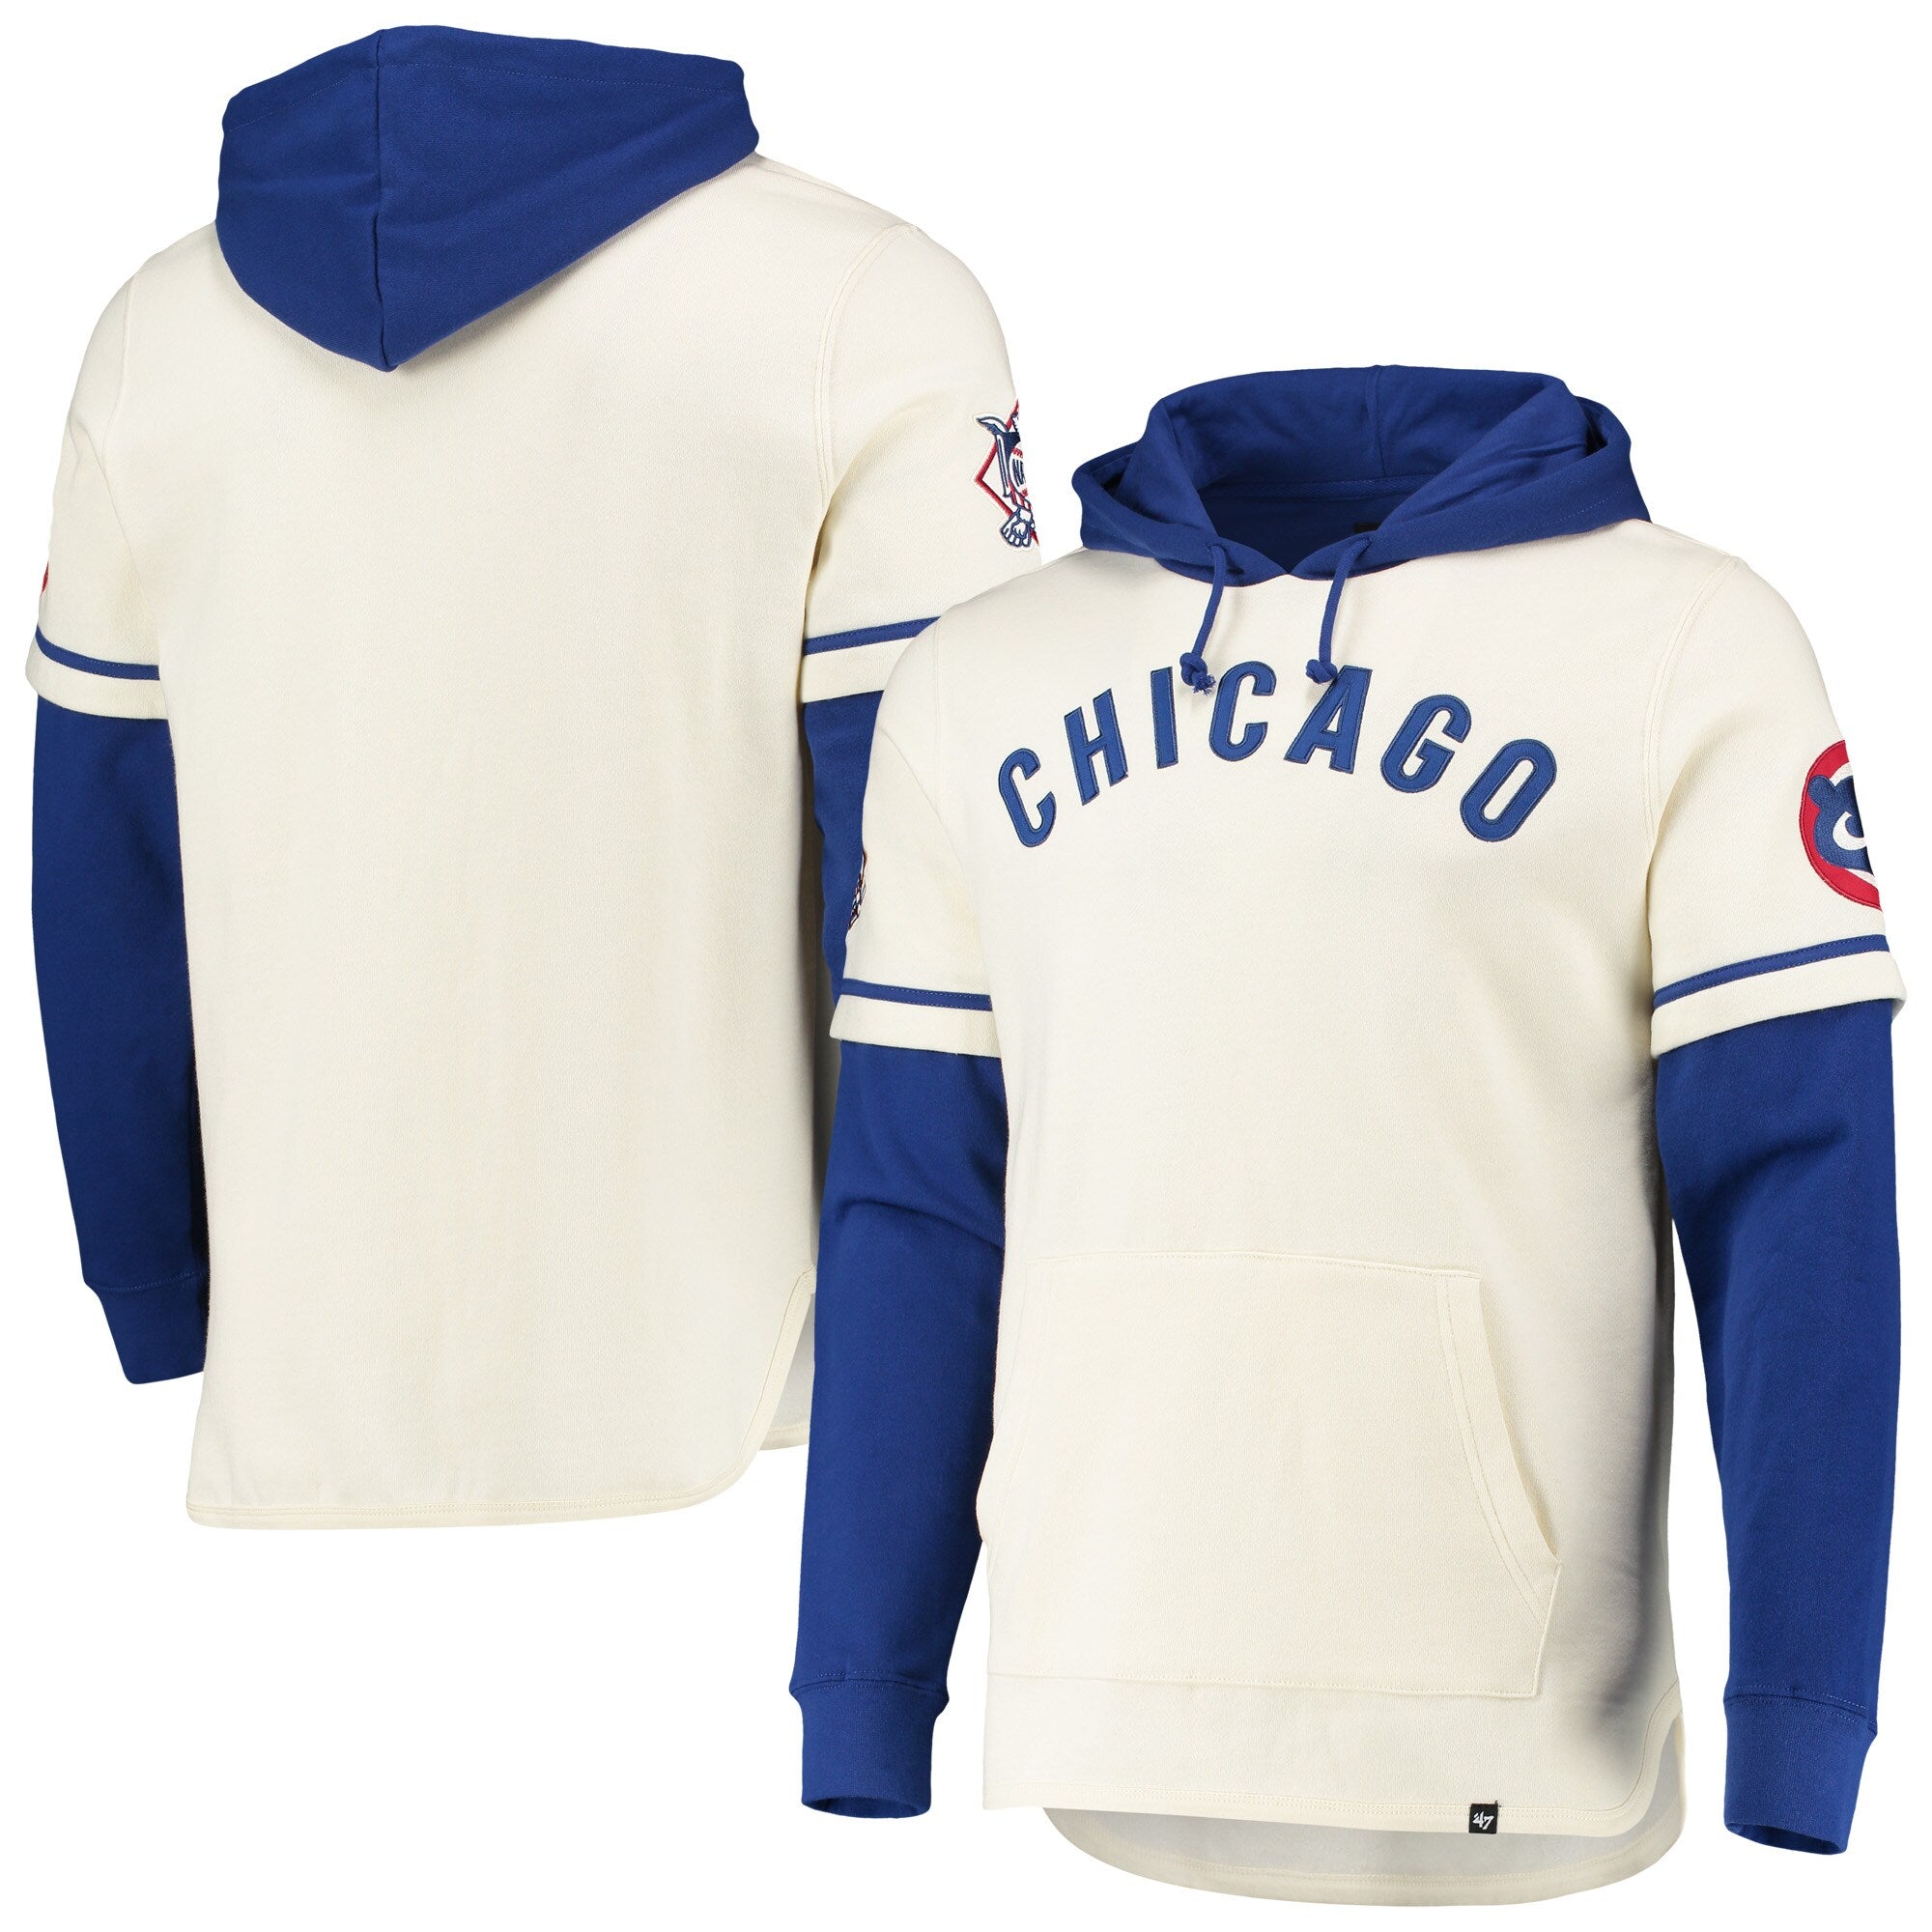 Nike Dri-FIT Early Work (MLB Chicago Cubs) Men's Pullover Hoodie.